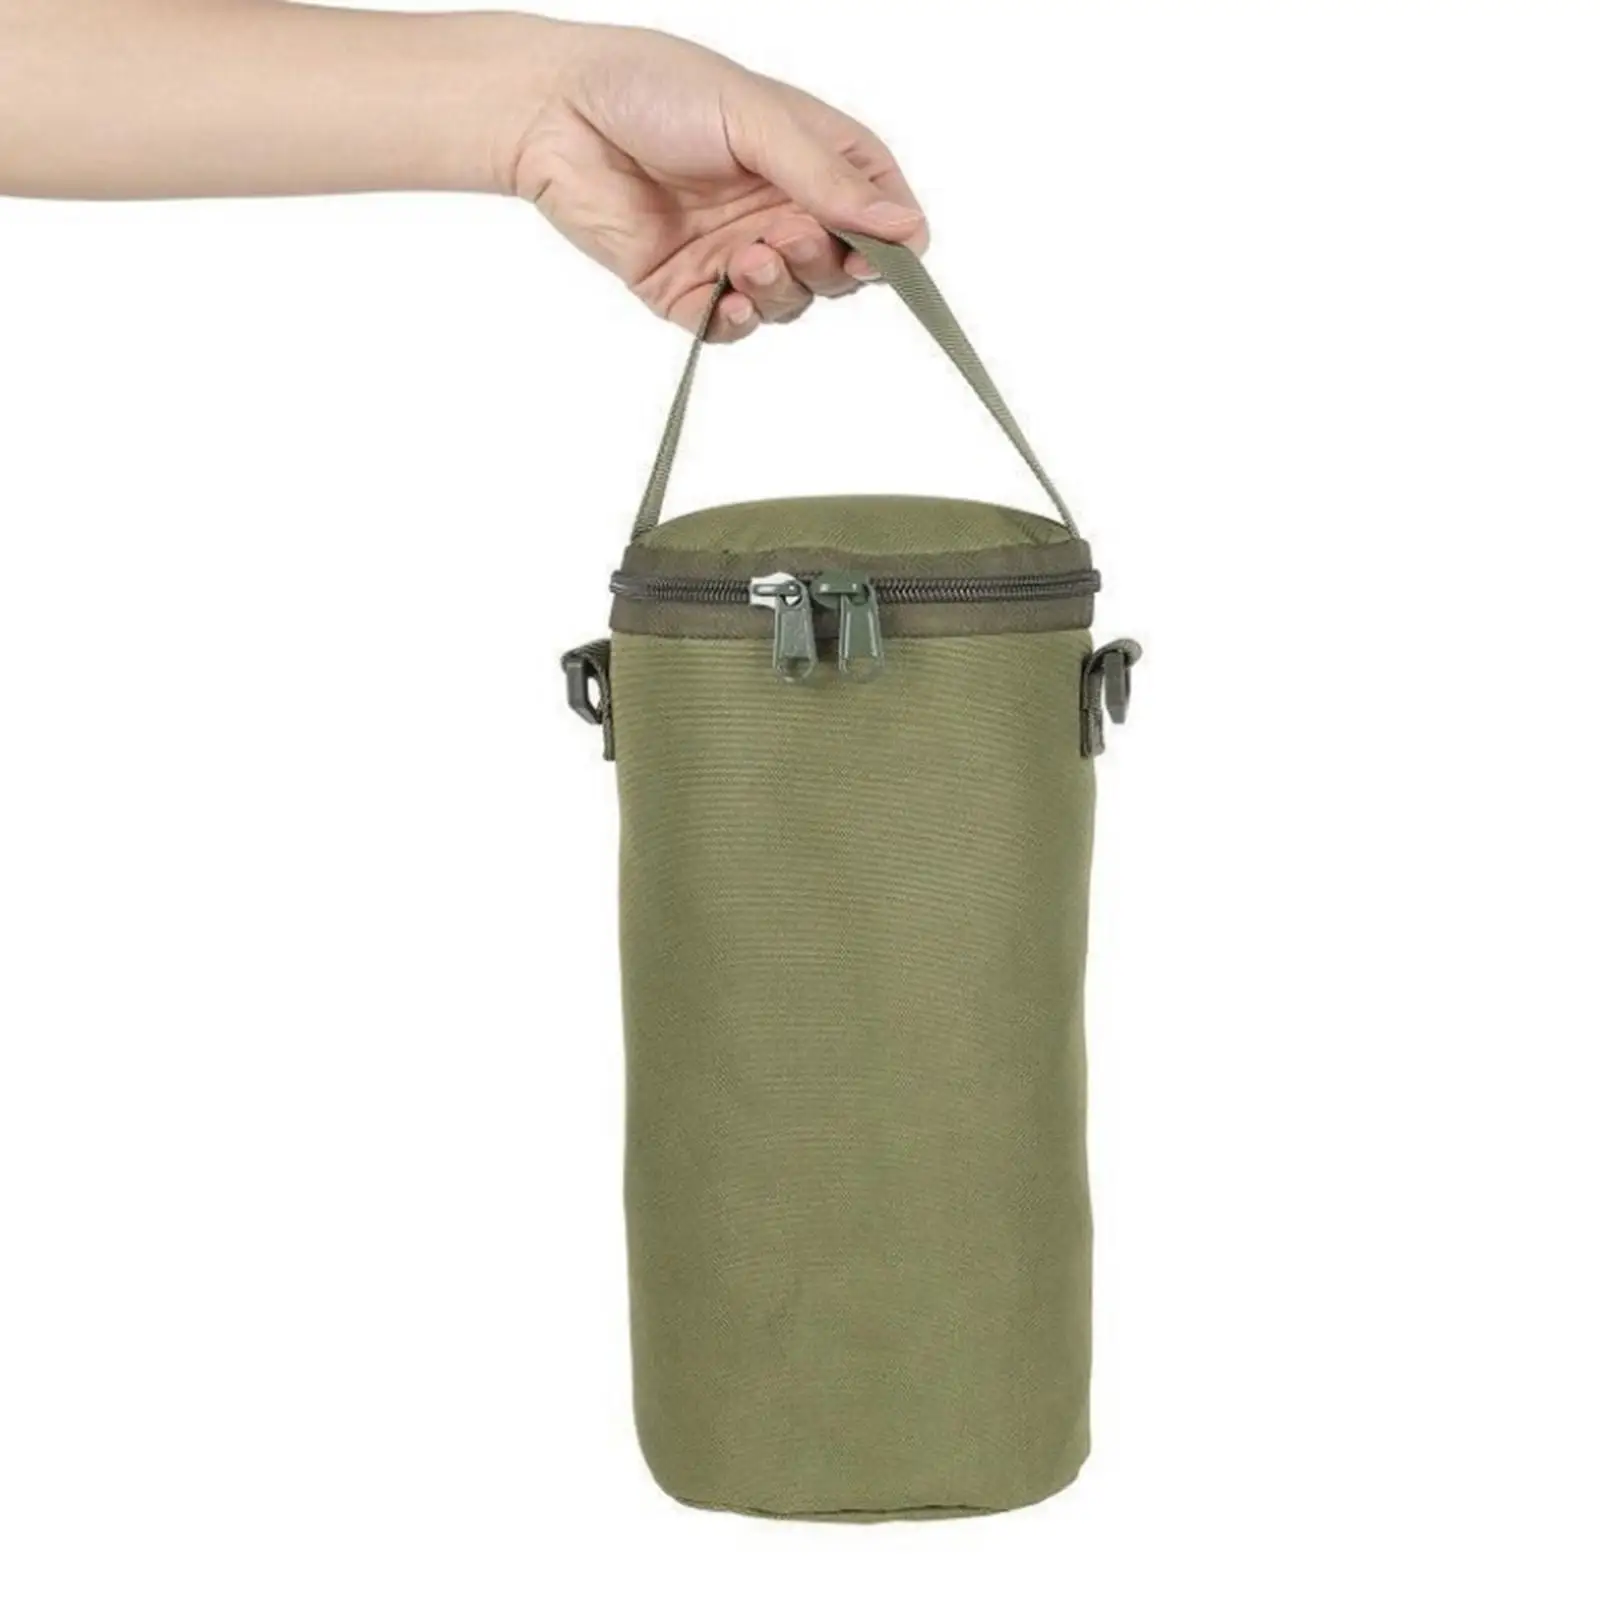 Durable Carry Bag Camping Lantern Gas Canister Cover Water Bottle Protector